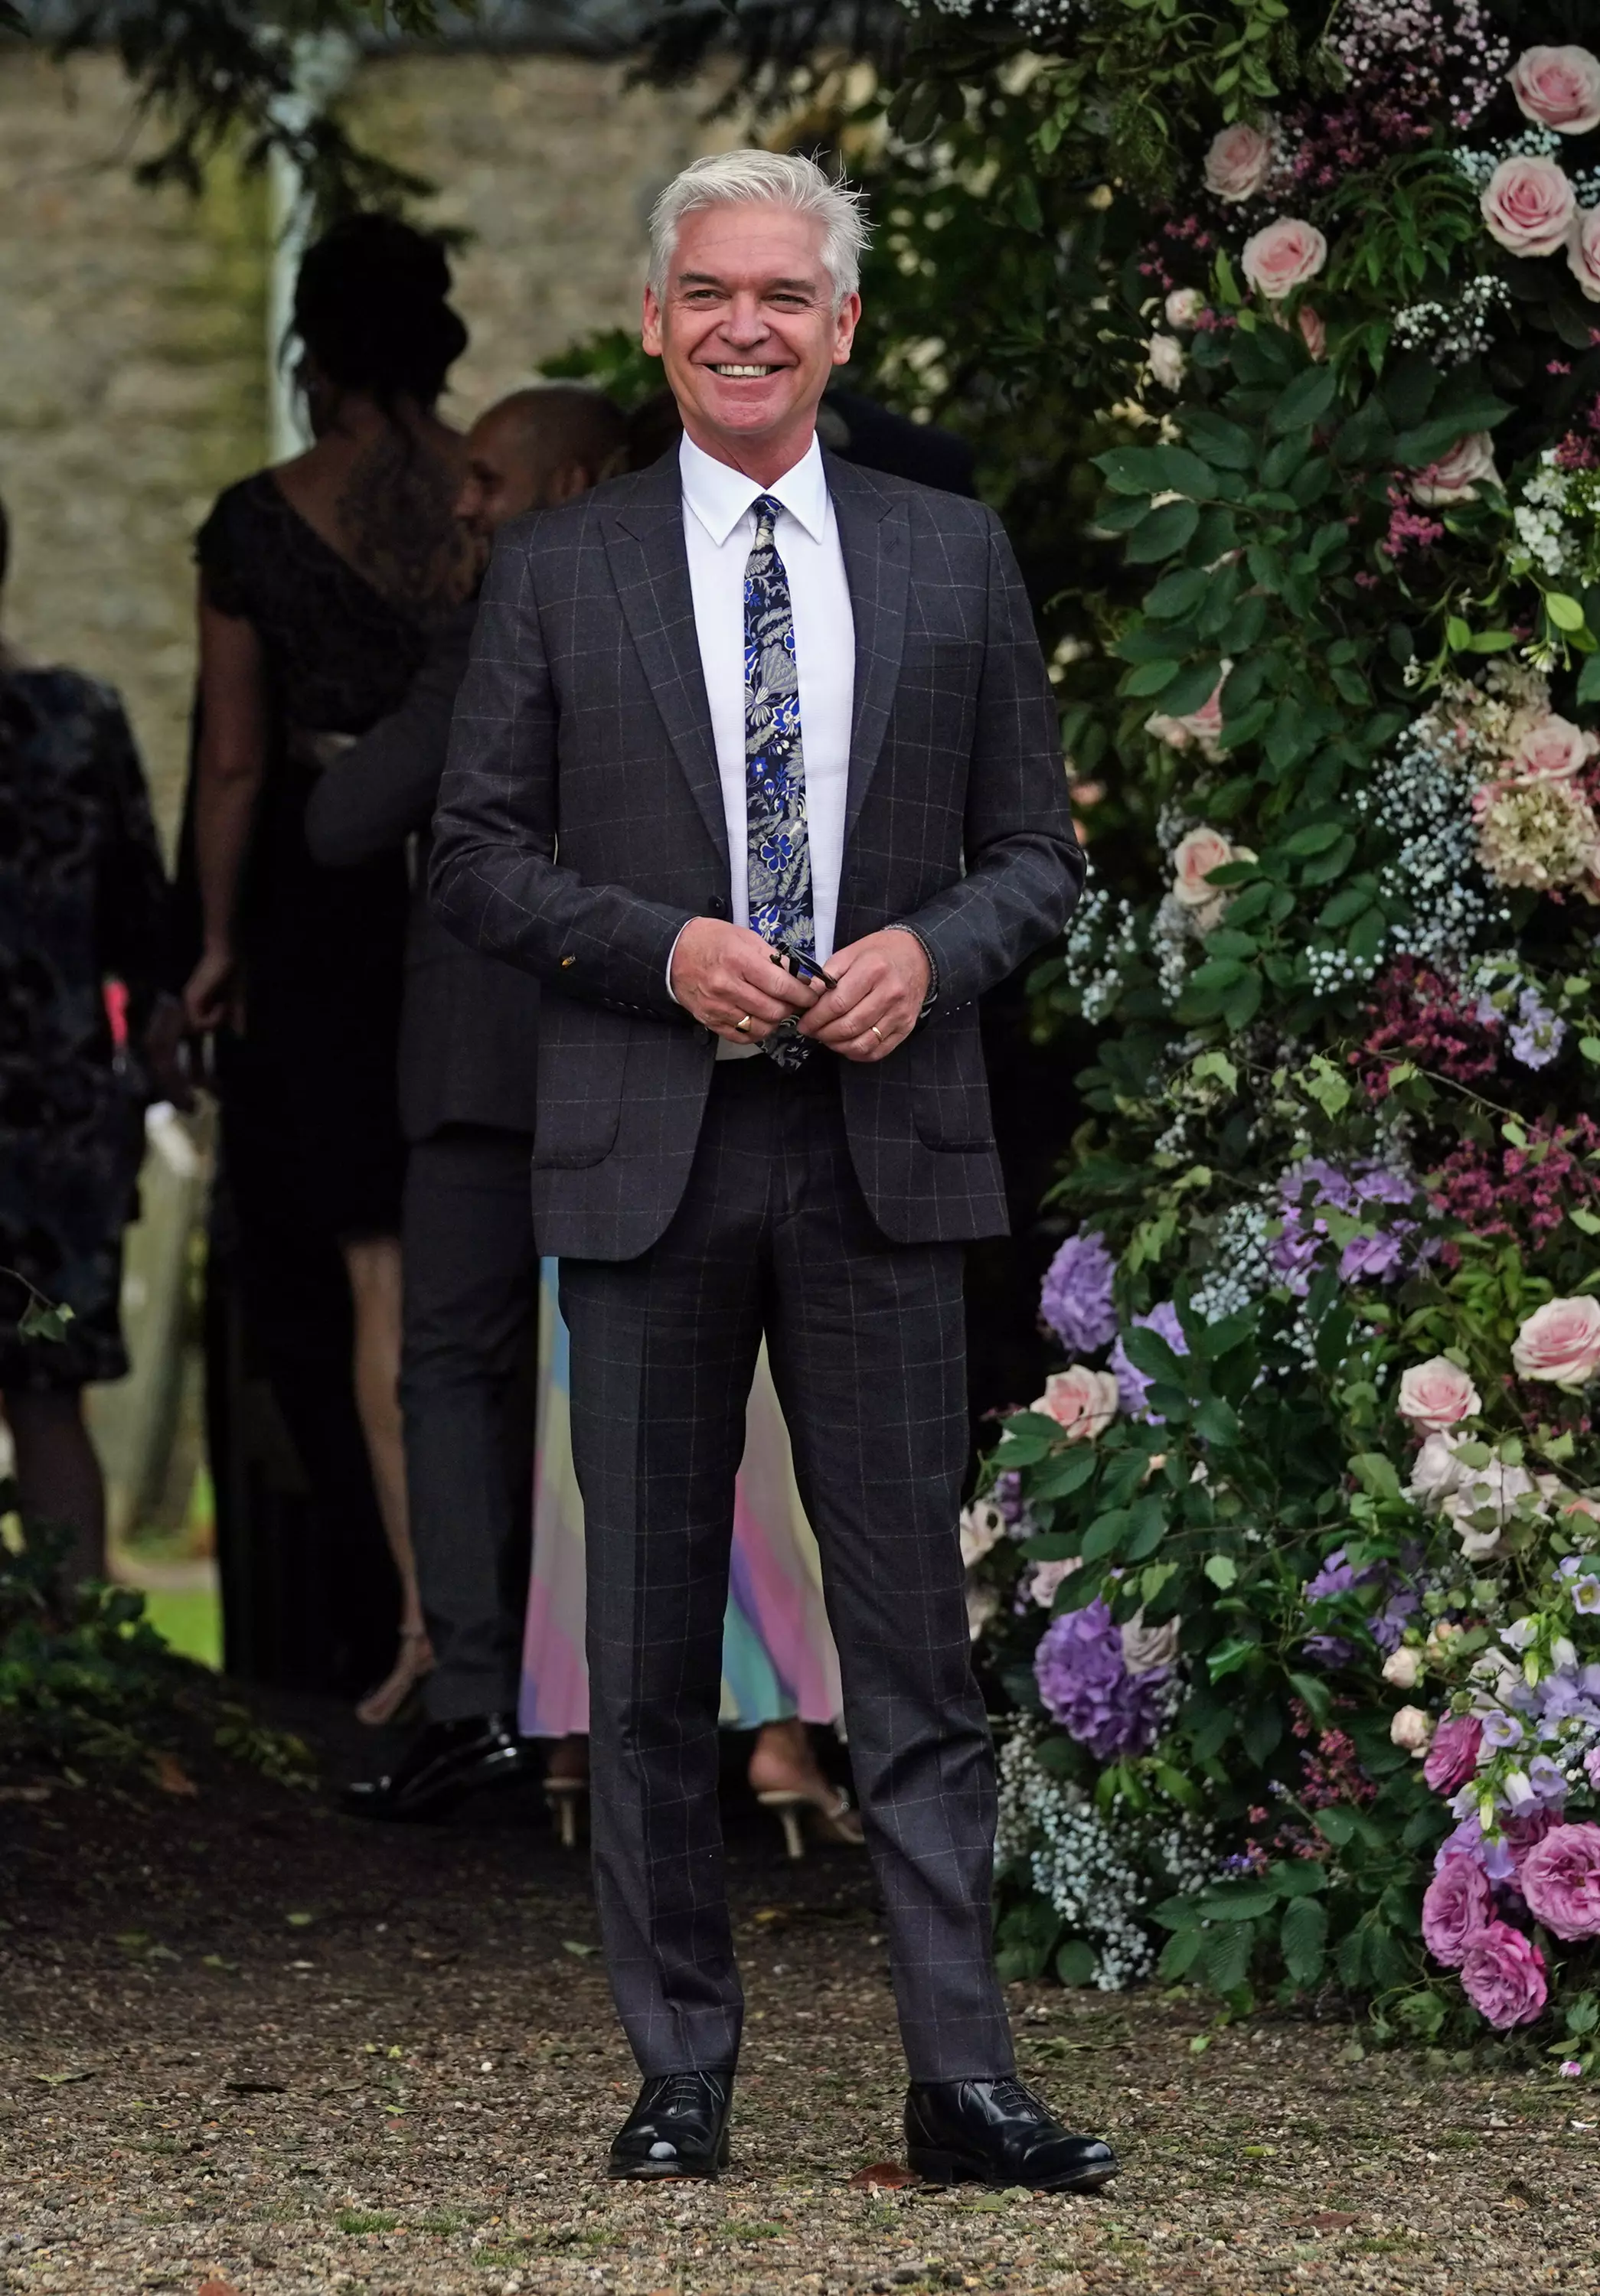 Philip Schofield was among the guests.